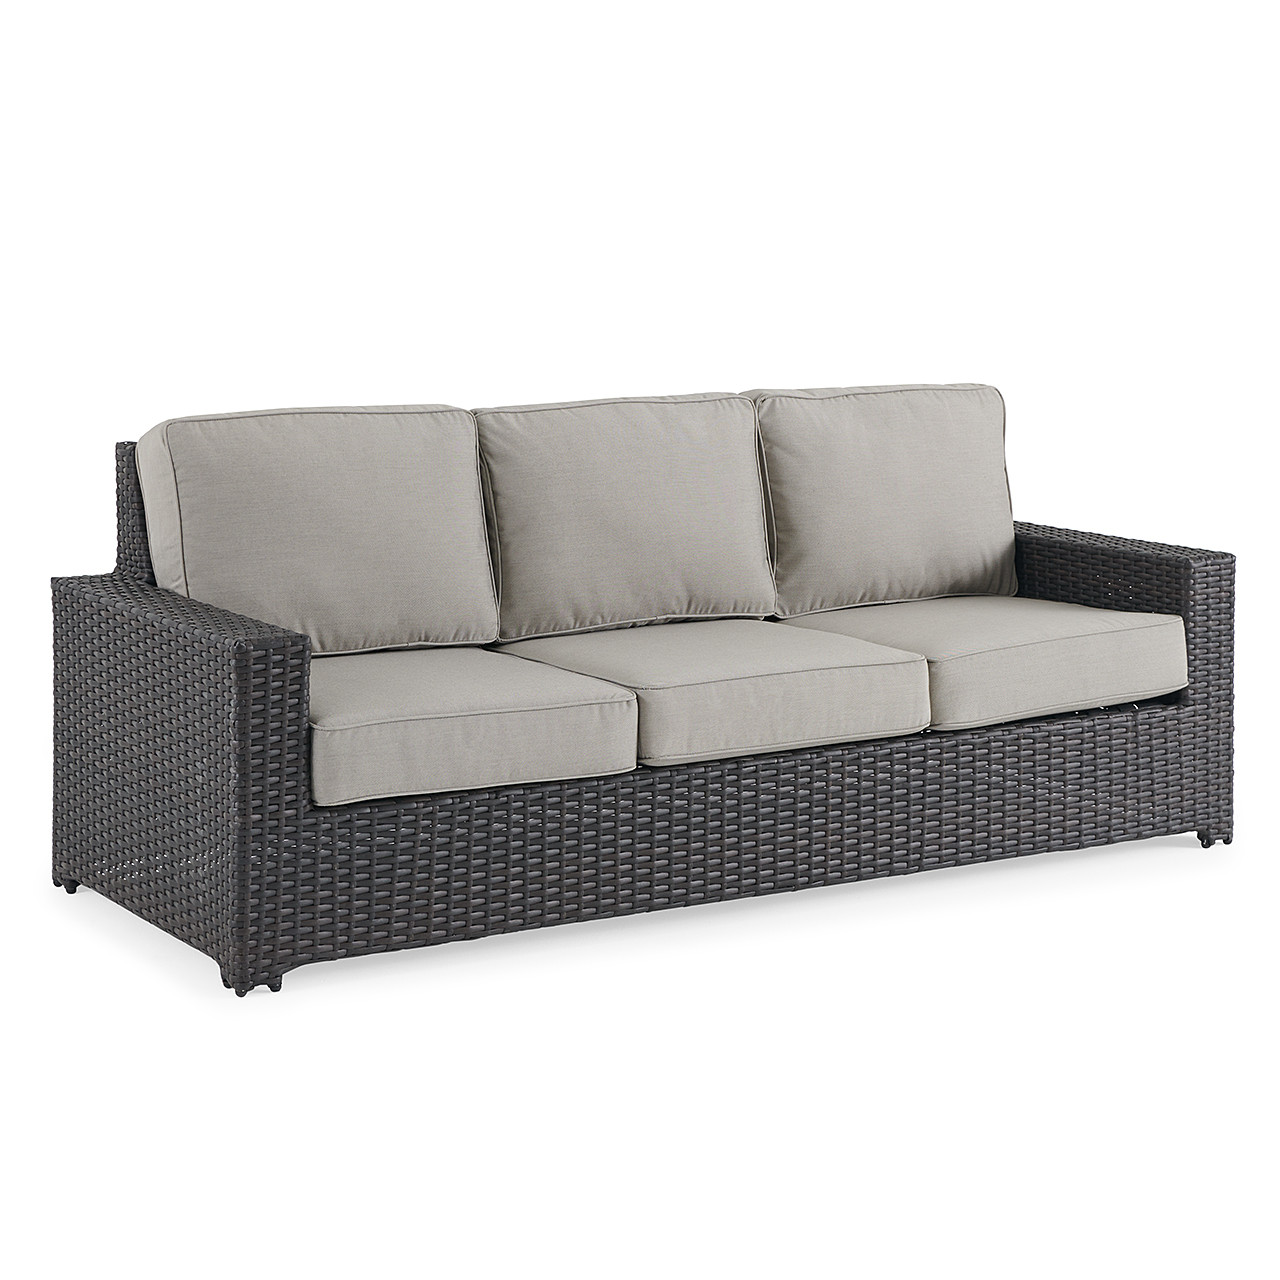 San Lucas Outdoor Wicker with Cushions 3 Piece Sofa Group + 43 x 23 in. Coffee Table